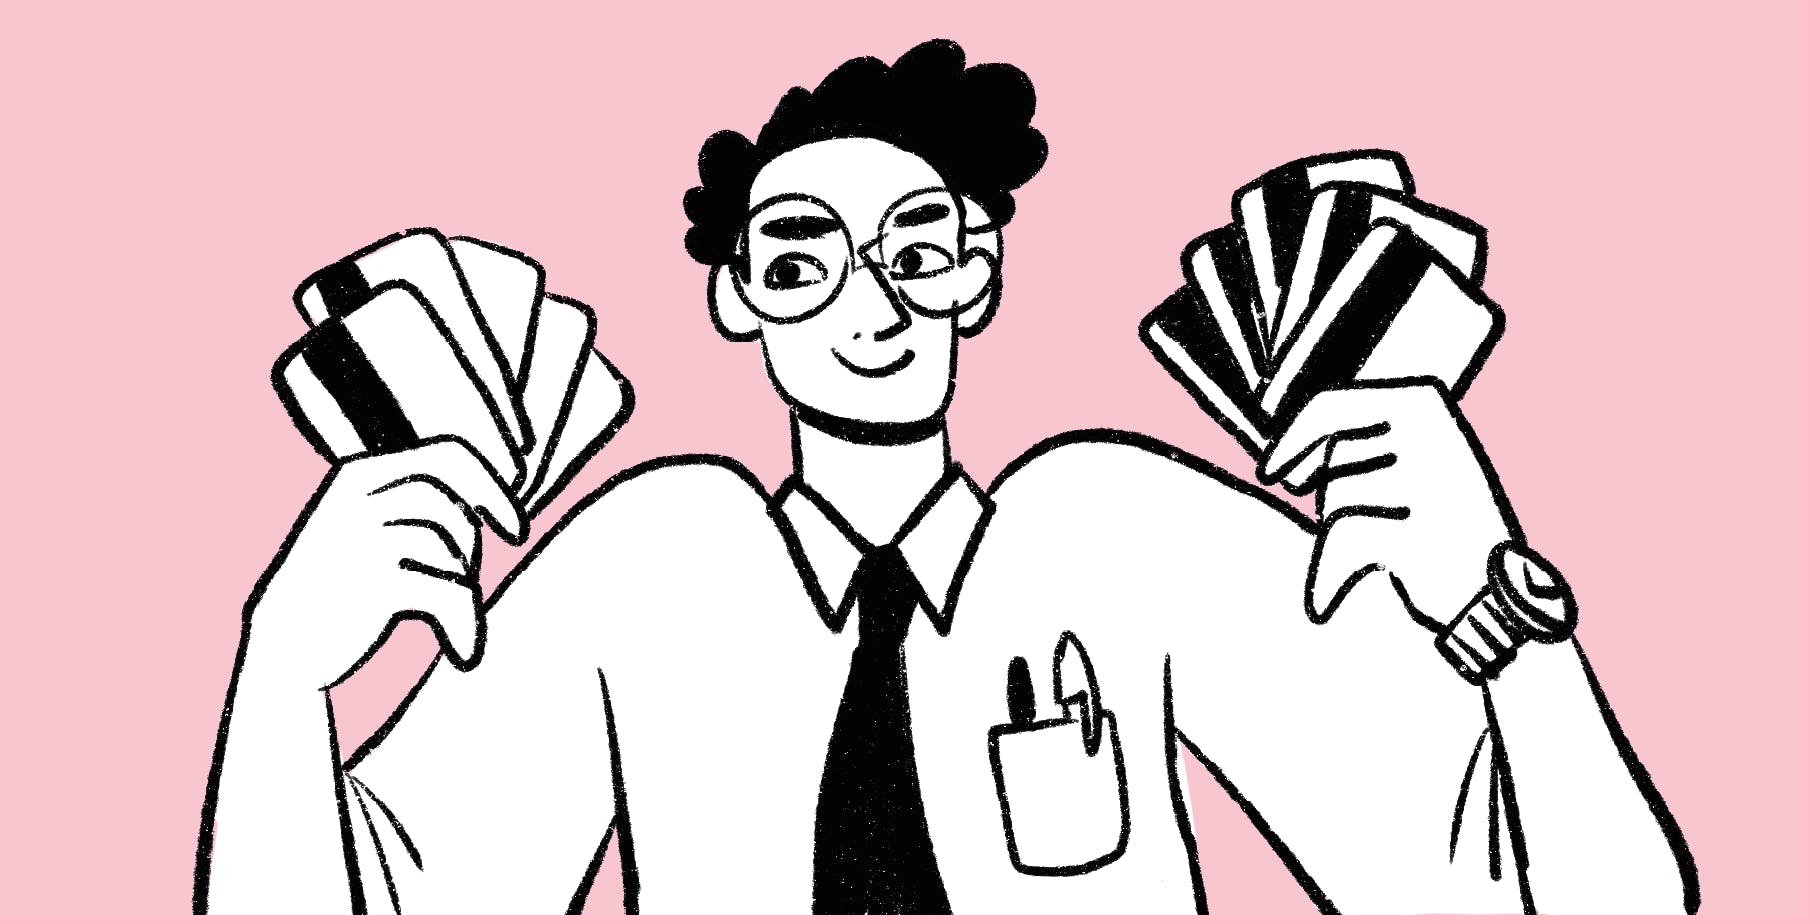 Businessman with many spending cards fanned out like playing cards